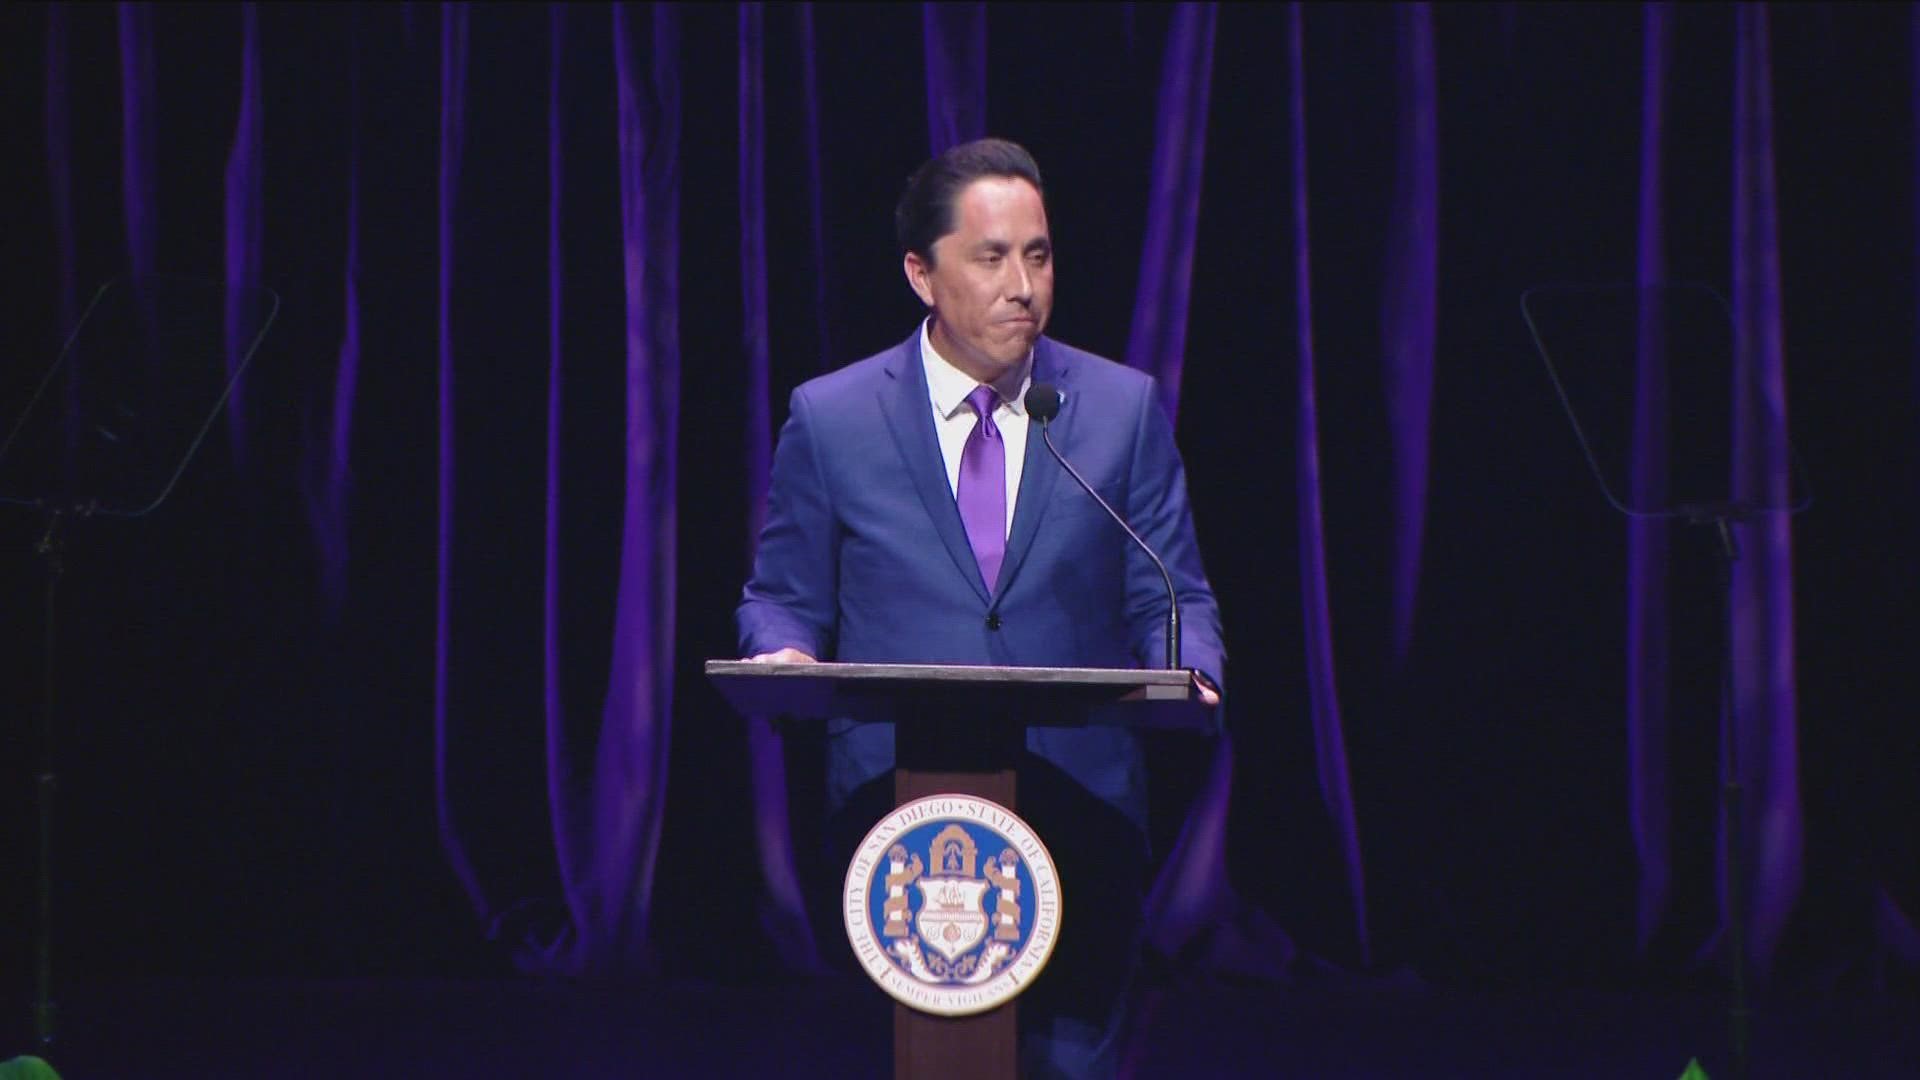 Todd Gloria delivered his third State of the City address on Wednesday from the San Diego Civic Theatre.